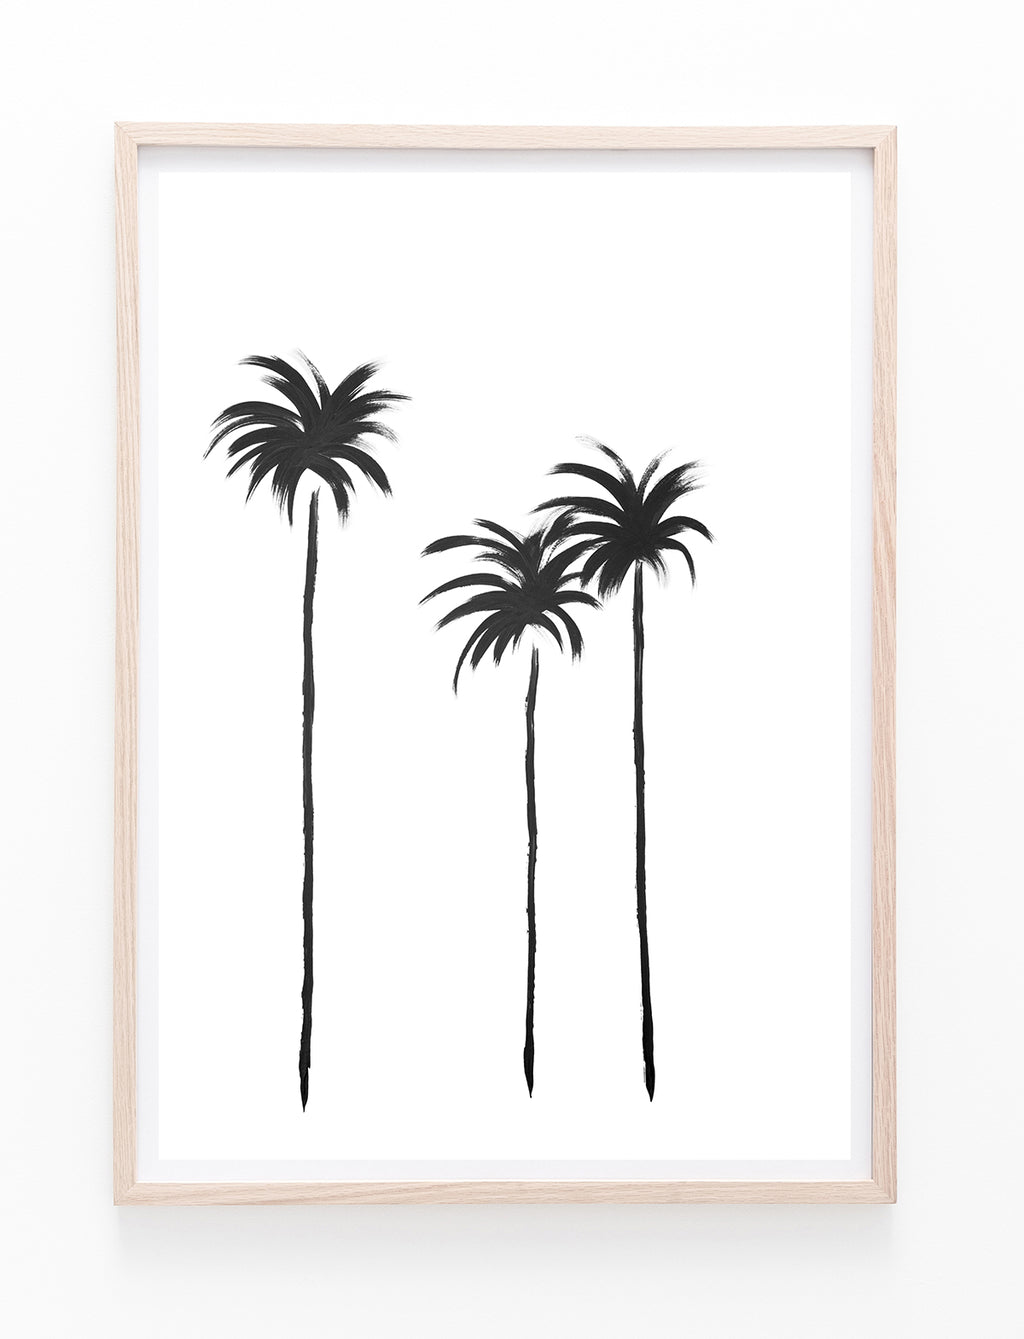 Painted Palms